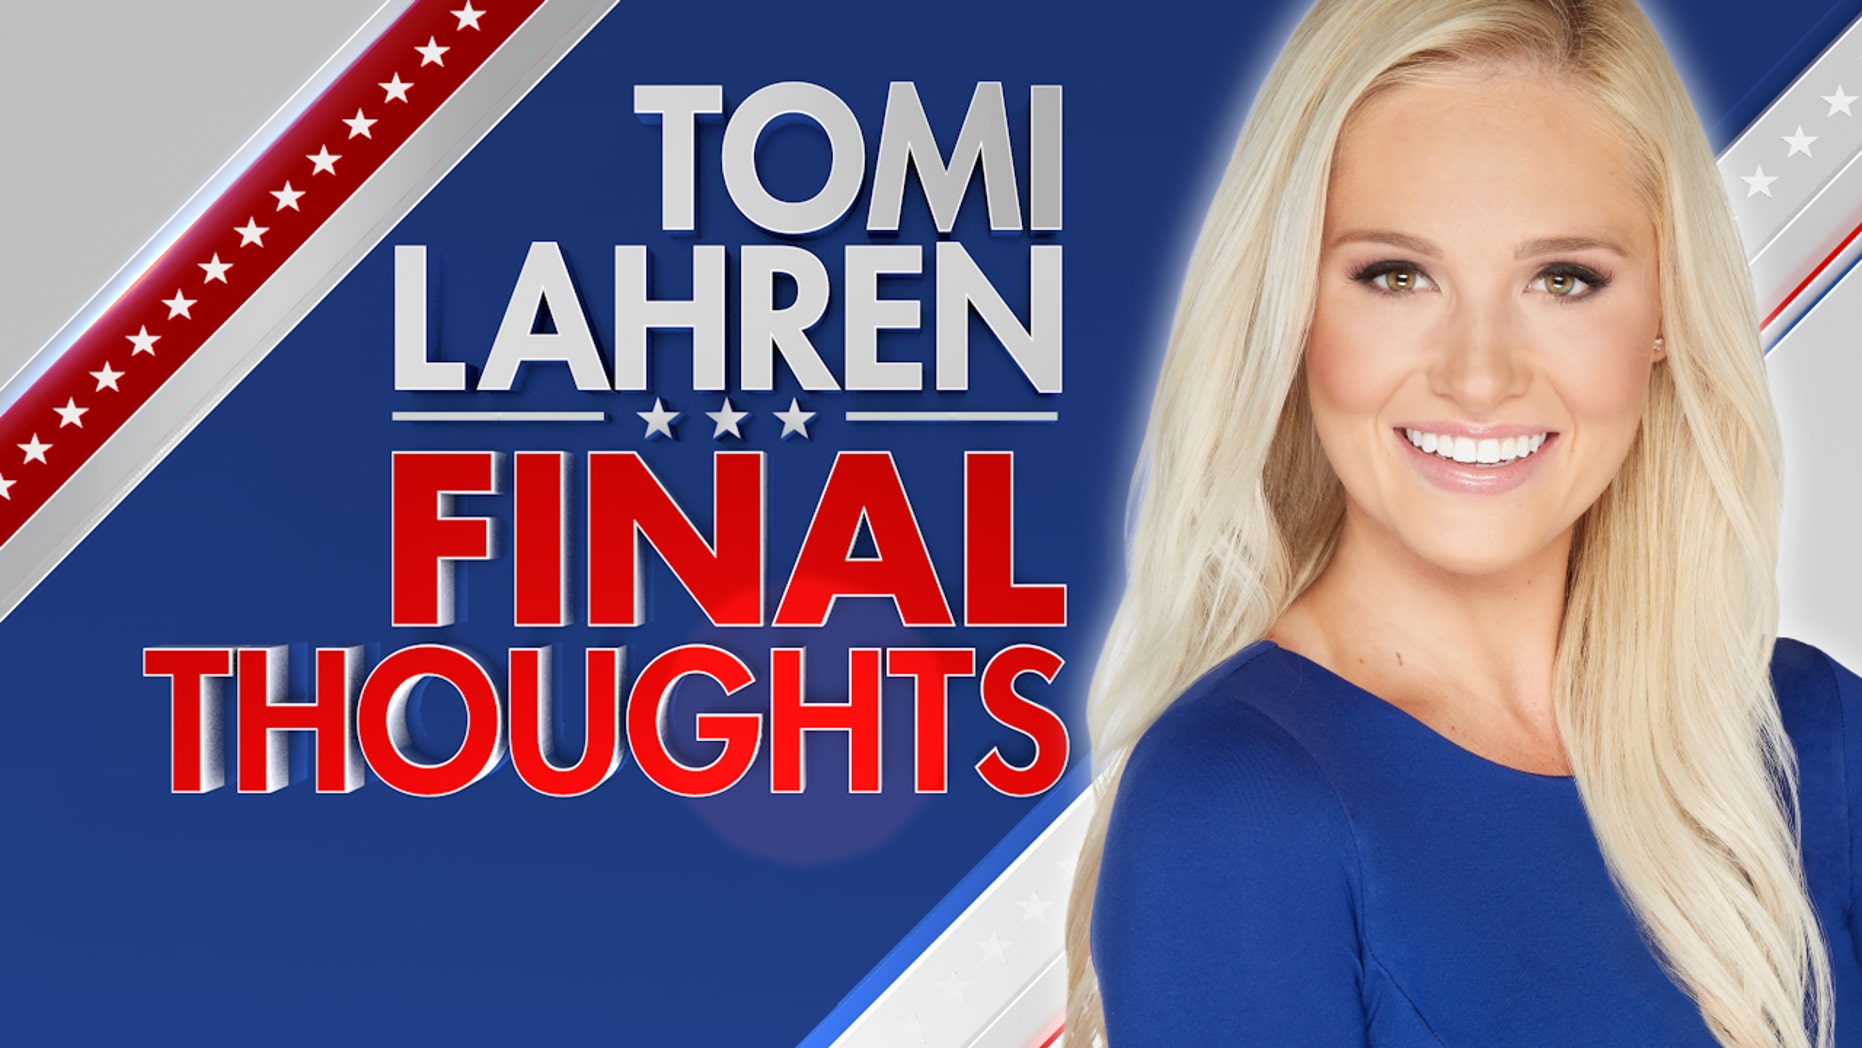 Tomi Lahren: President Trump, do NOT let us down -- Build that wall. Make America safe again